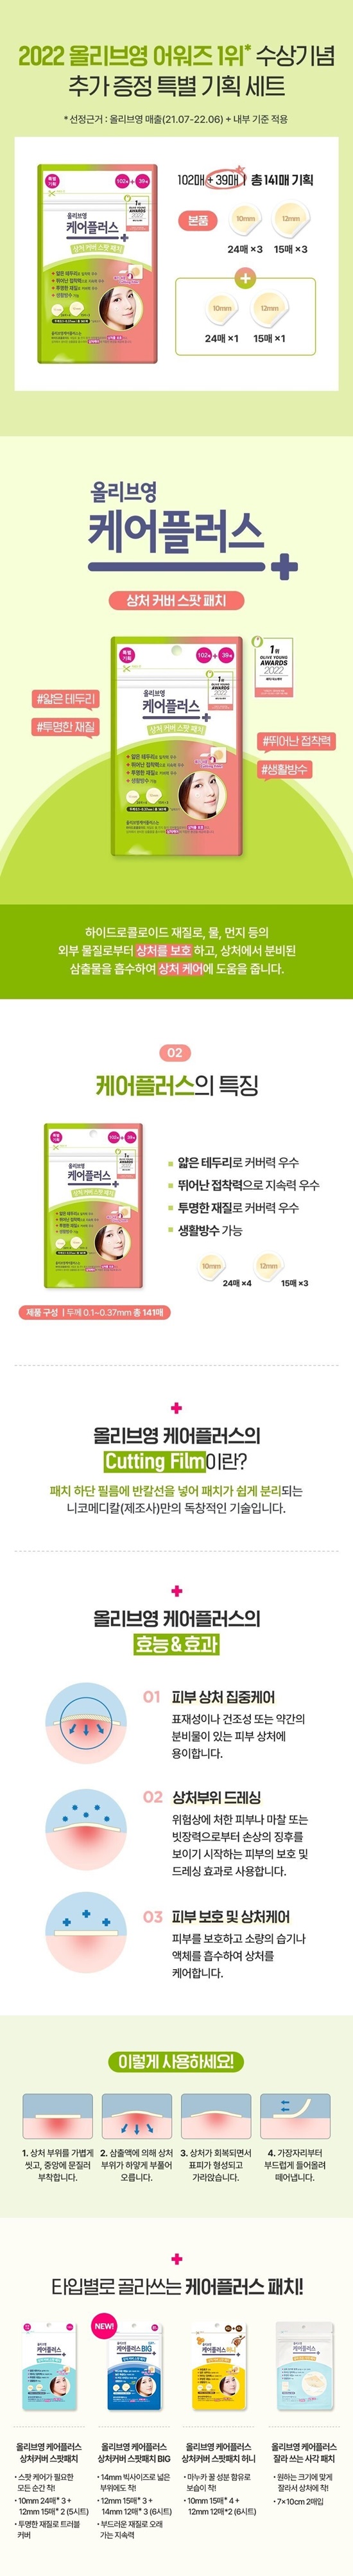 olive-young-care-plus-102-39-info.jpg